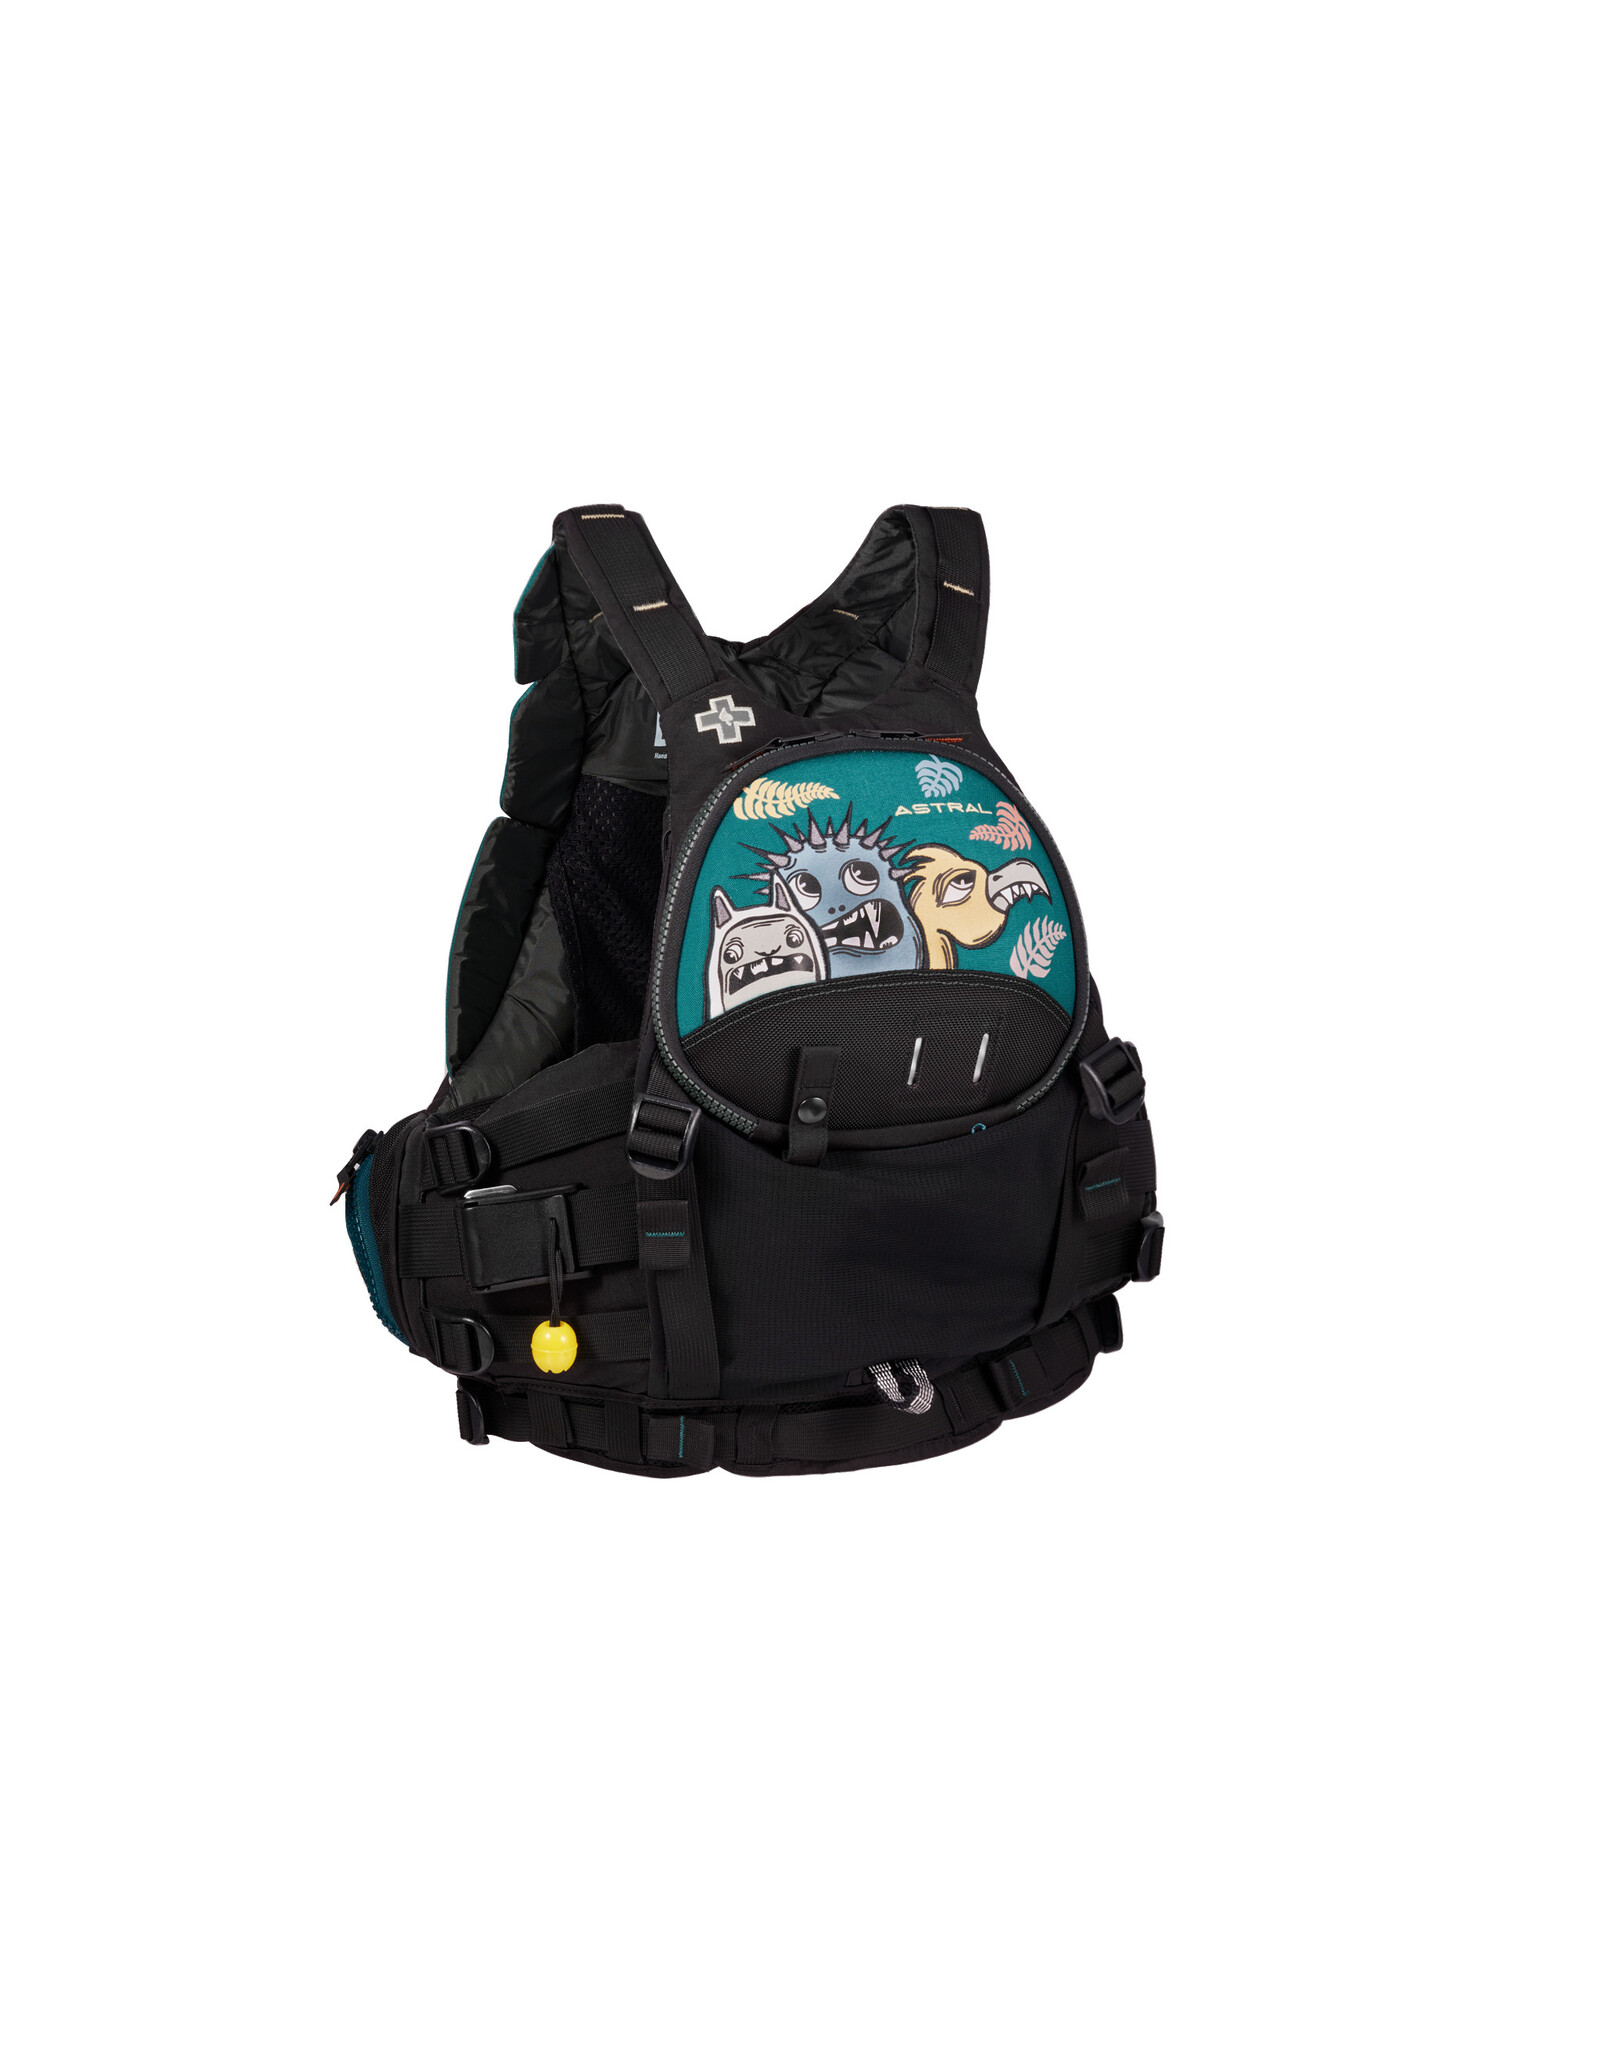 Astral Greenjacket Rescue PFD Limited Edition The Outfitters Shop